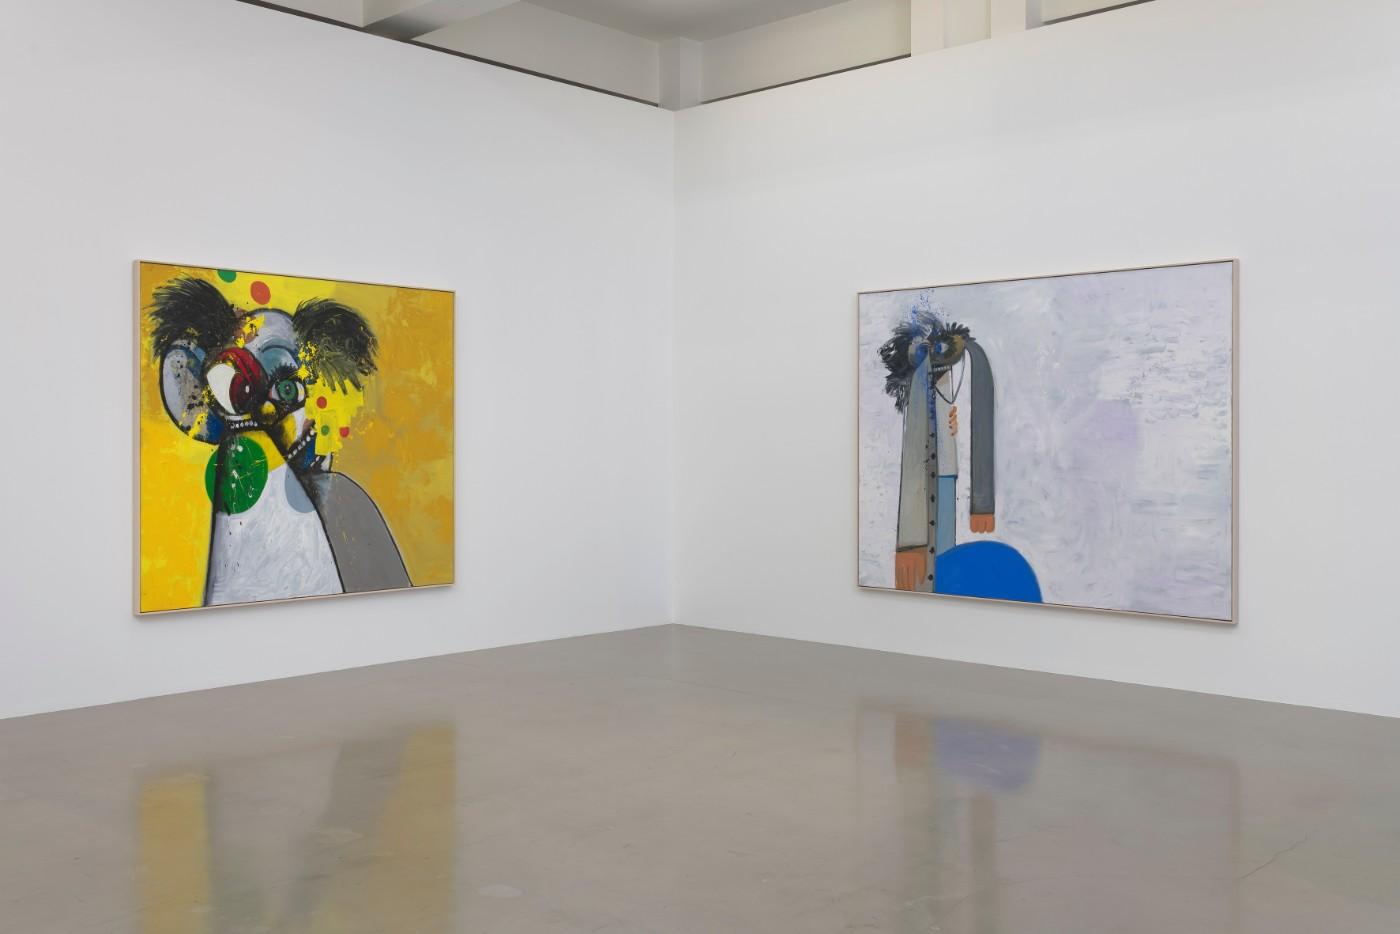 Installation view, George Condo: What’s the Point?, at Sprüth Magers in Los Angeles through June 1